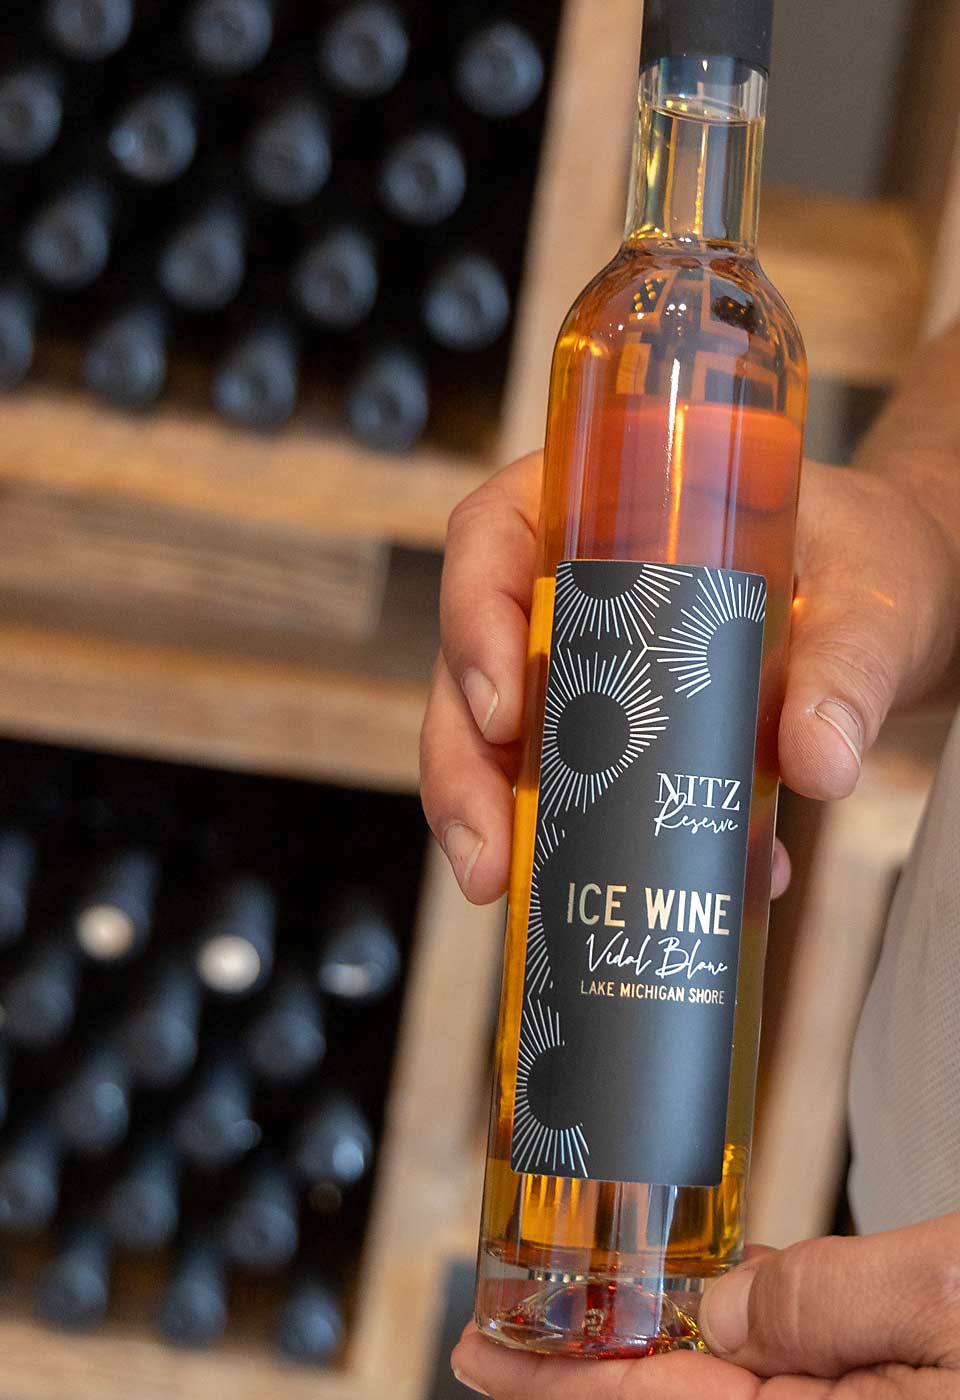 Ice wine, produced from grapes that have been frozen while still on the vine, is one of Chill Hill’s specialties. (Matt Milkovich/Good Fruit Grower)